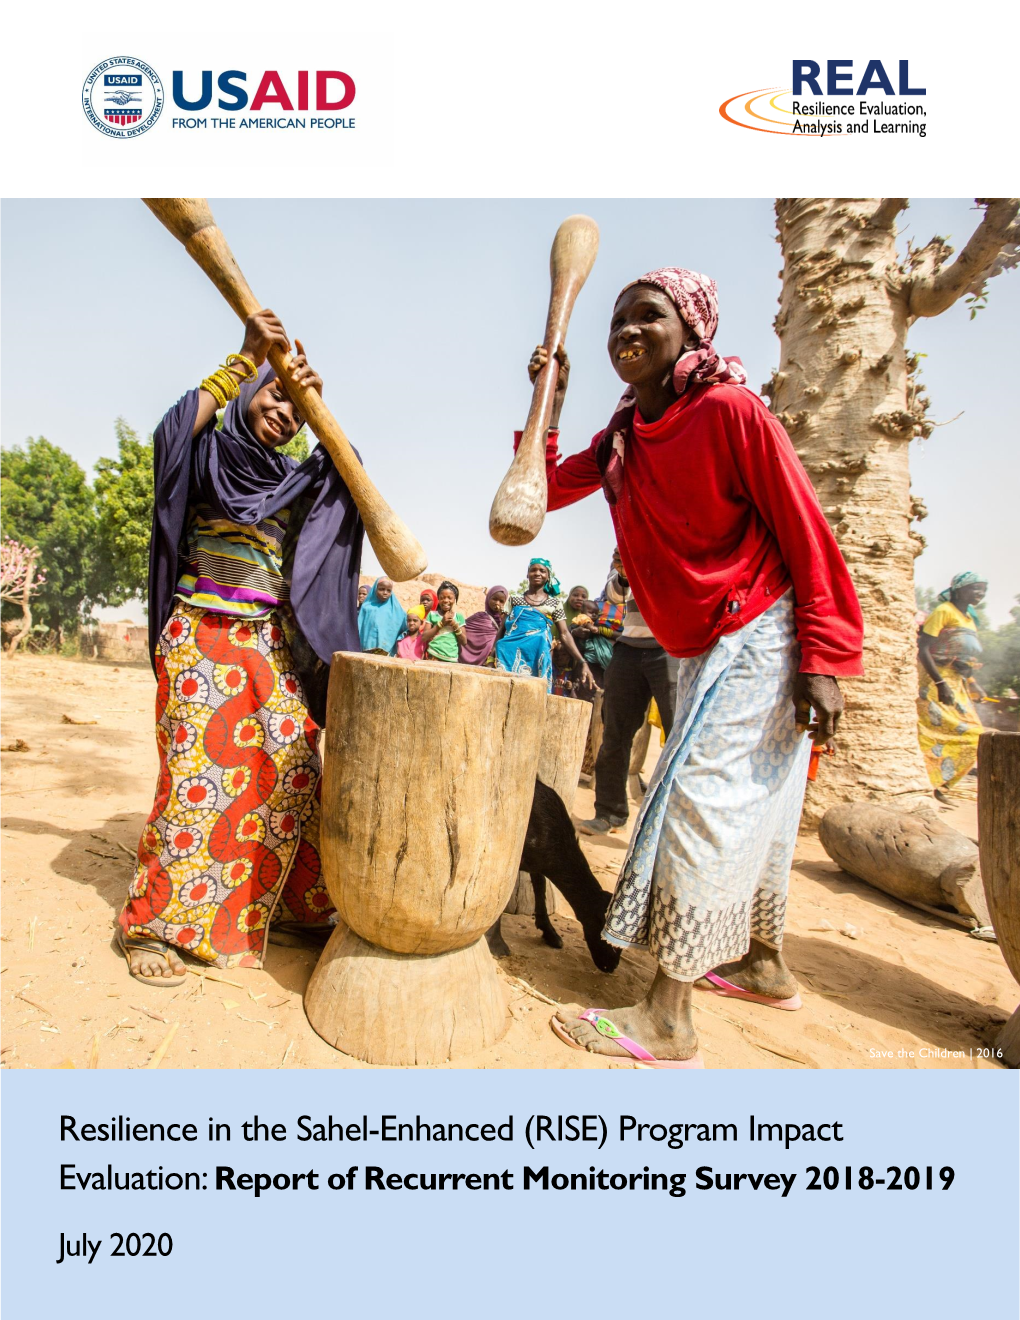 Resilience in the Sahel-Enhanced (RISE) Program Impact Evaluation: Report of Recurrent Monitoring Survey 2018-2019